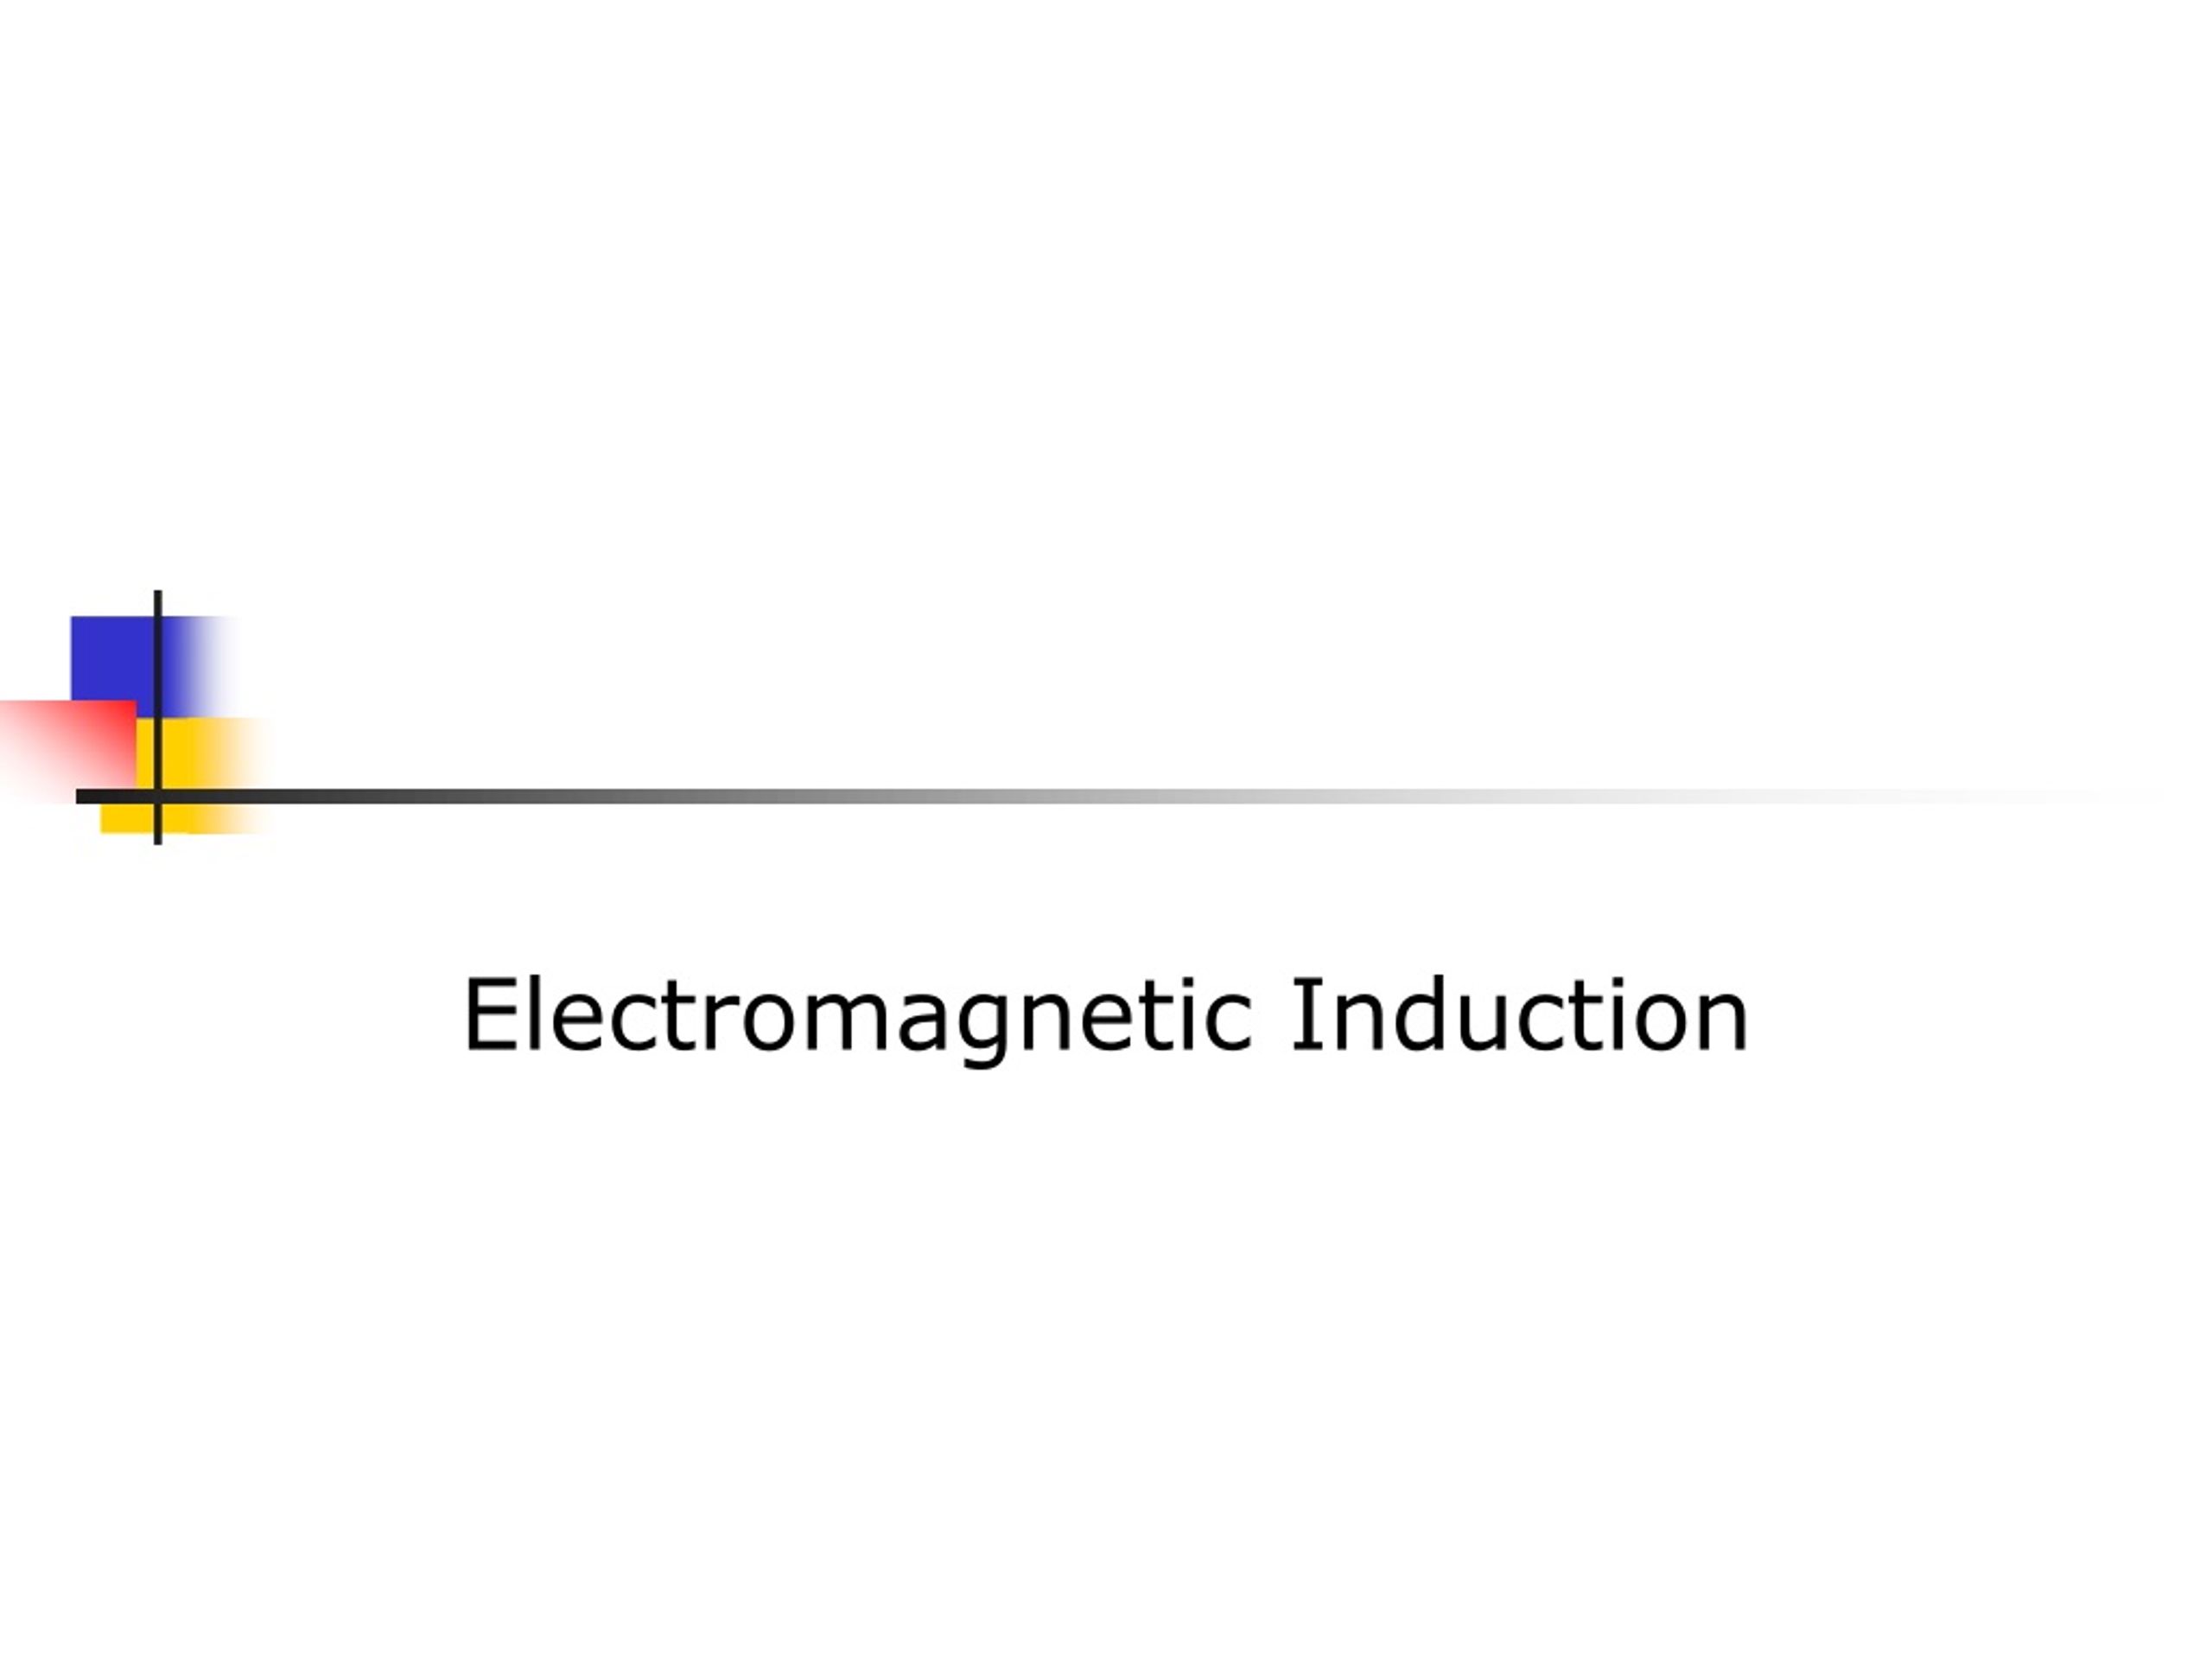 Ppt Electromagnetic Induction Powerpoint Presentation Free Download Id9128756 7591